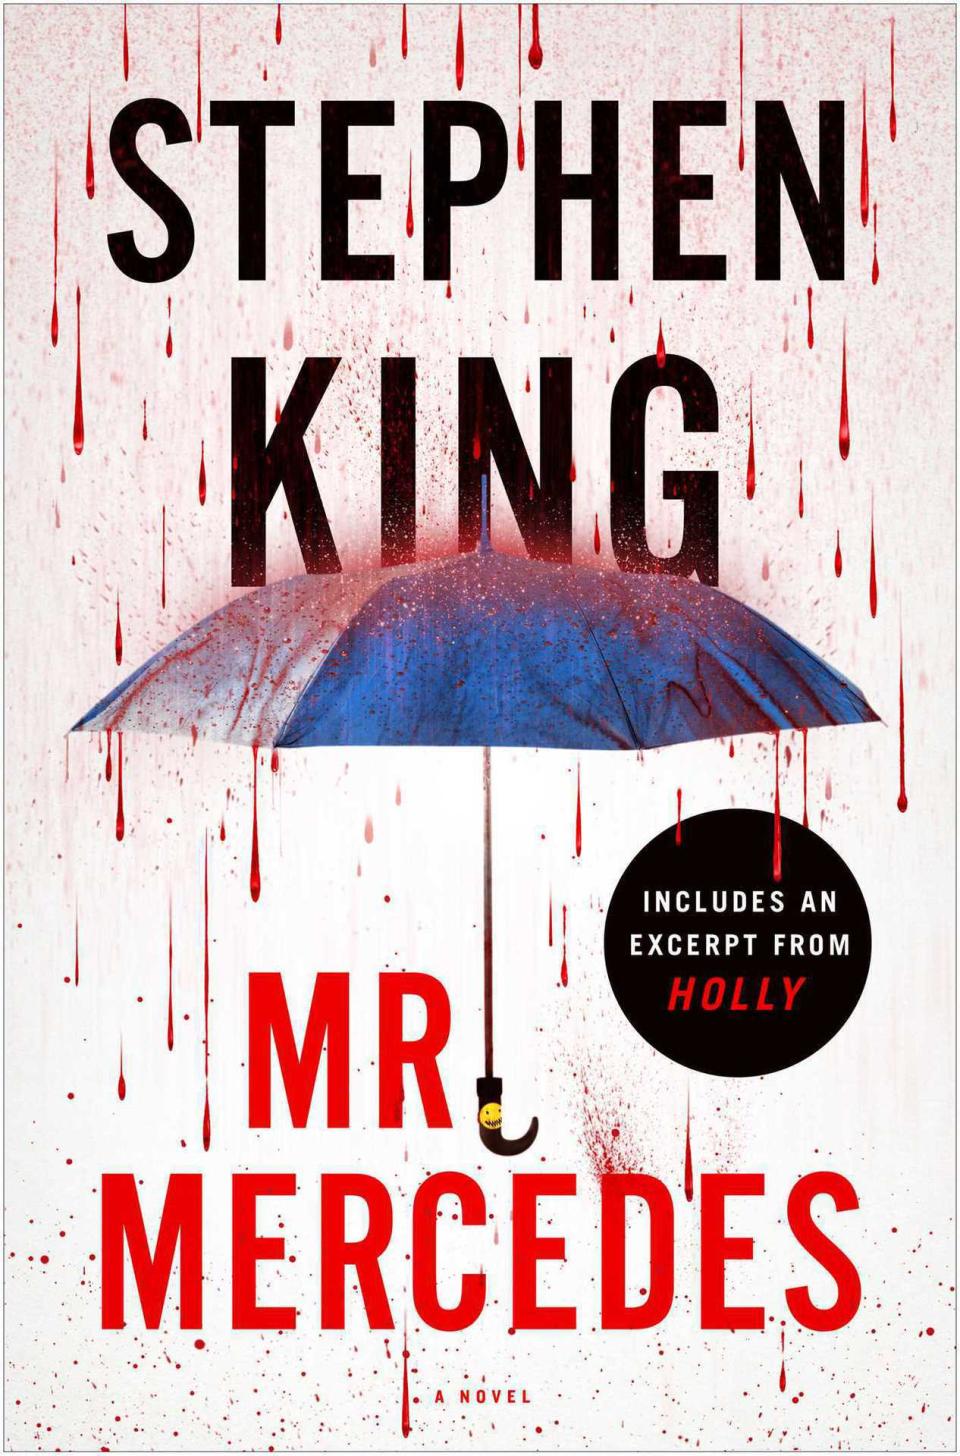 “Mr. Mercedes”  by Stephen King